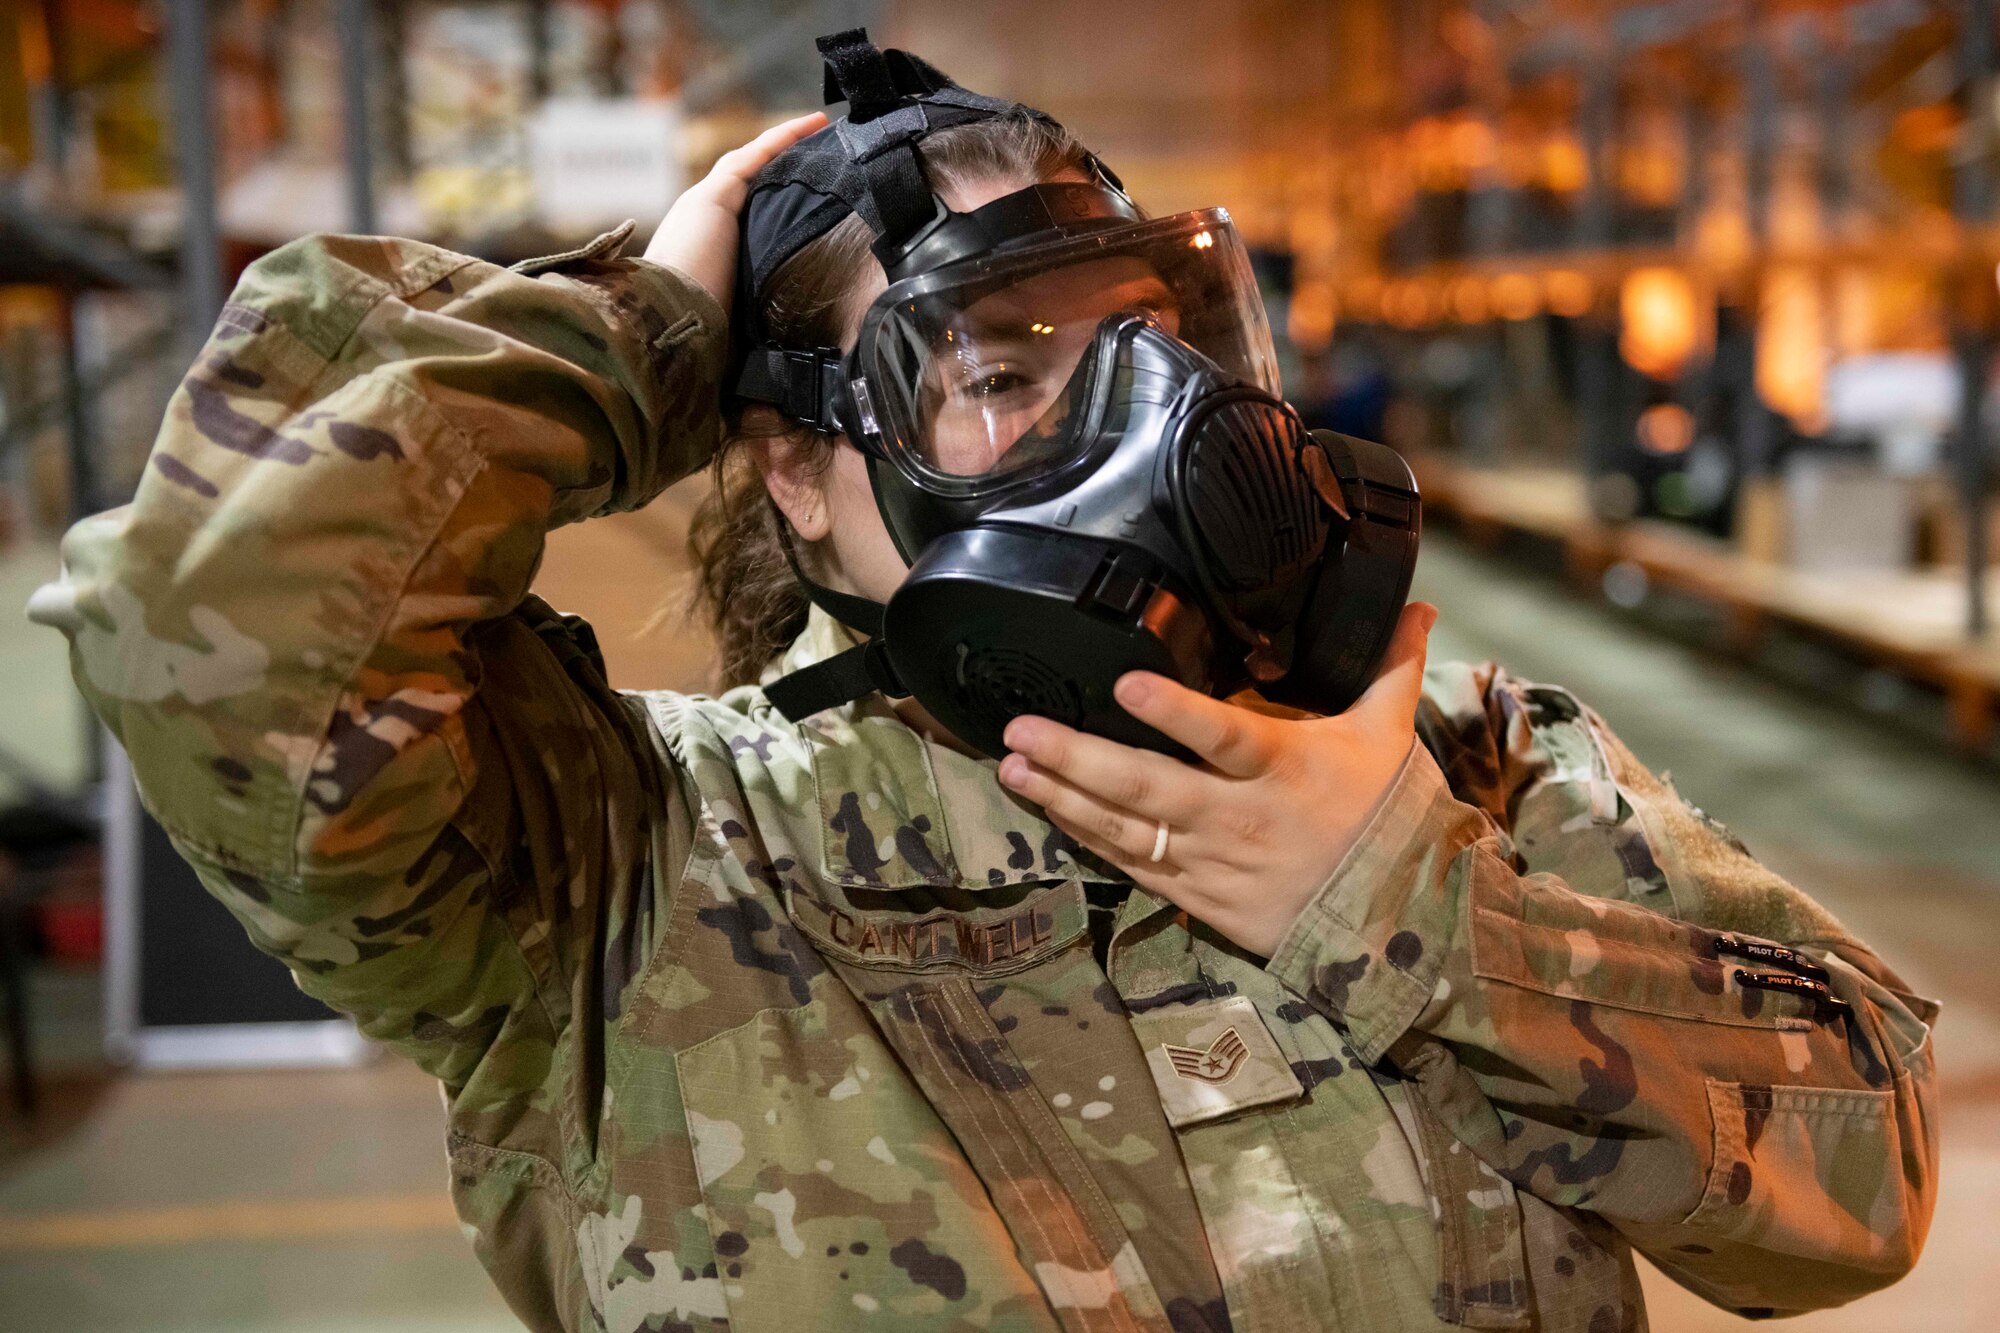 Airmen from the 501st Combat Support Wing don their Mission Oriented Protective Posture gear during Ability to Survive and Operate training at RAF Alconbury, England, Aug. 26, 2021. Airmen participated in the ATSO rodeo to get a refresher on how to properly utilize their MOPP gear in a potential chemical environment. (U.S. Air Force photo by Senior Airman Jennifer Zima)